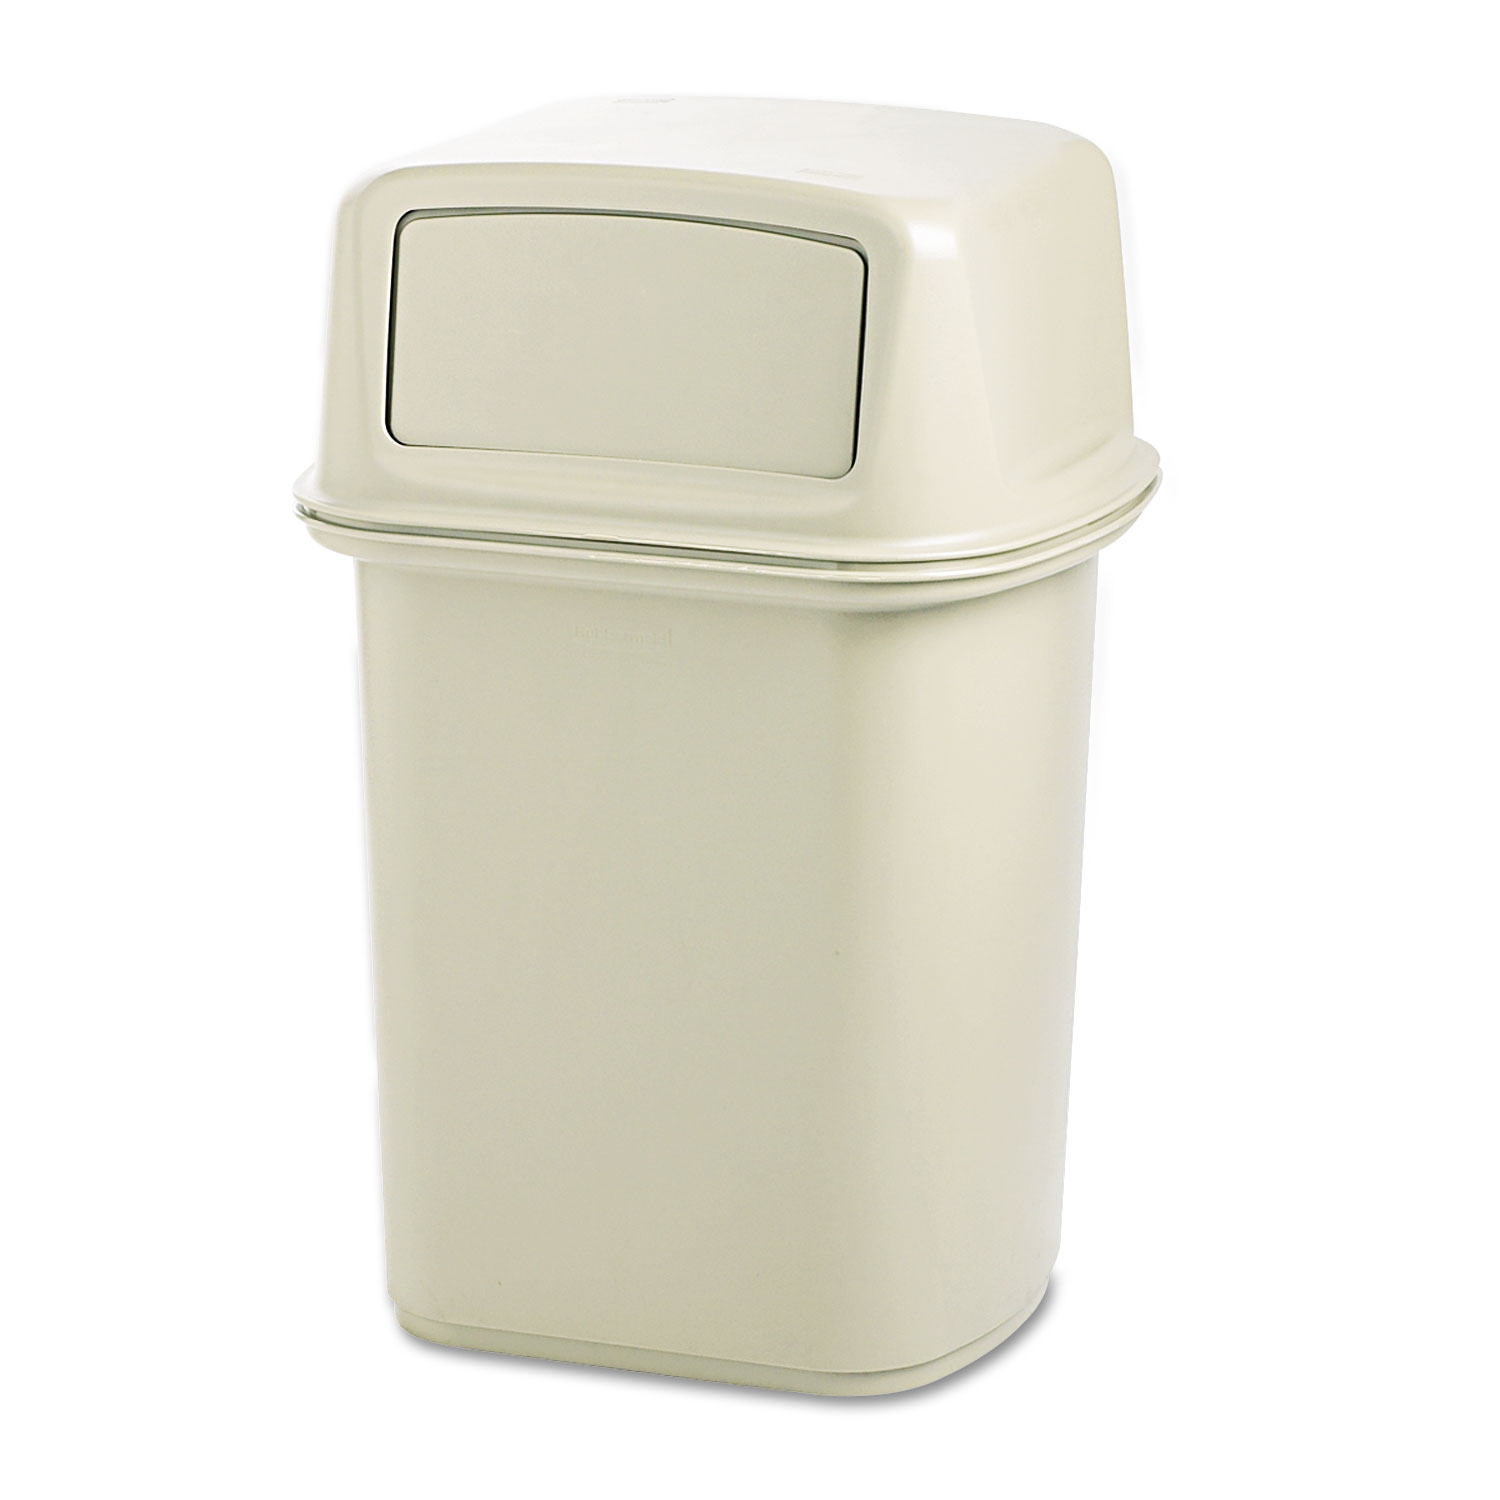  Rubbermaid Commercial FG917188BEIG Ranger Fire-Safe Container, Square, Structural Foam, 45 gal, Beige (RCP917188BG) 